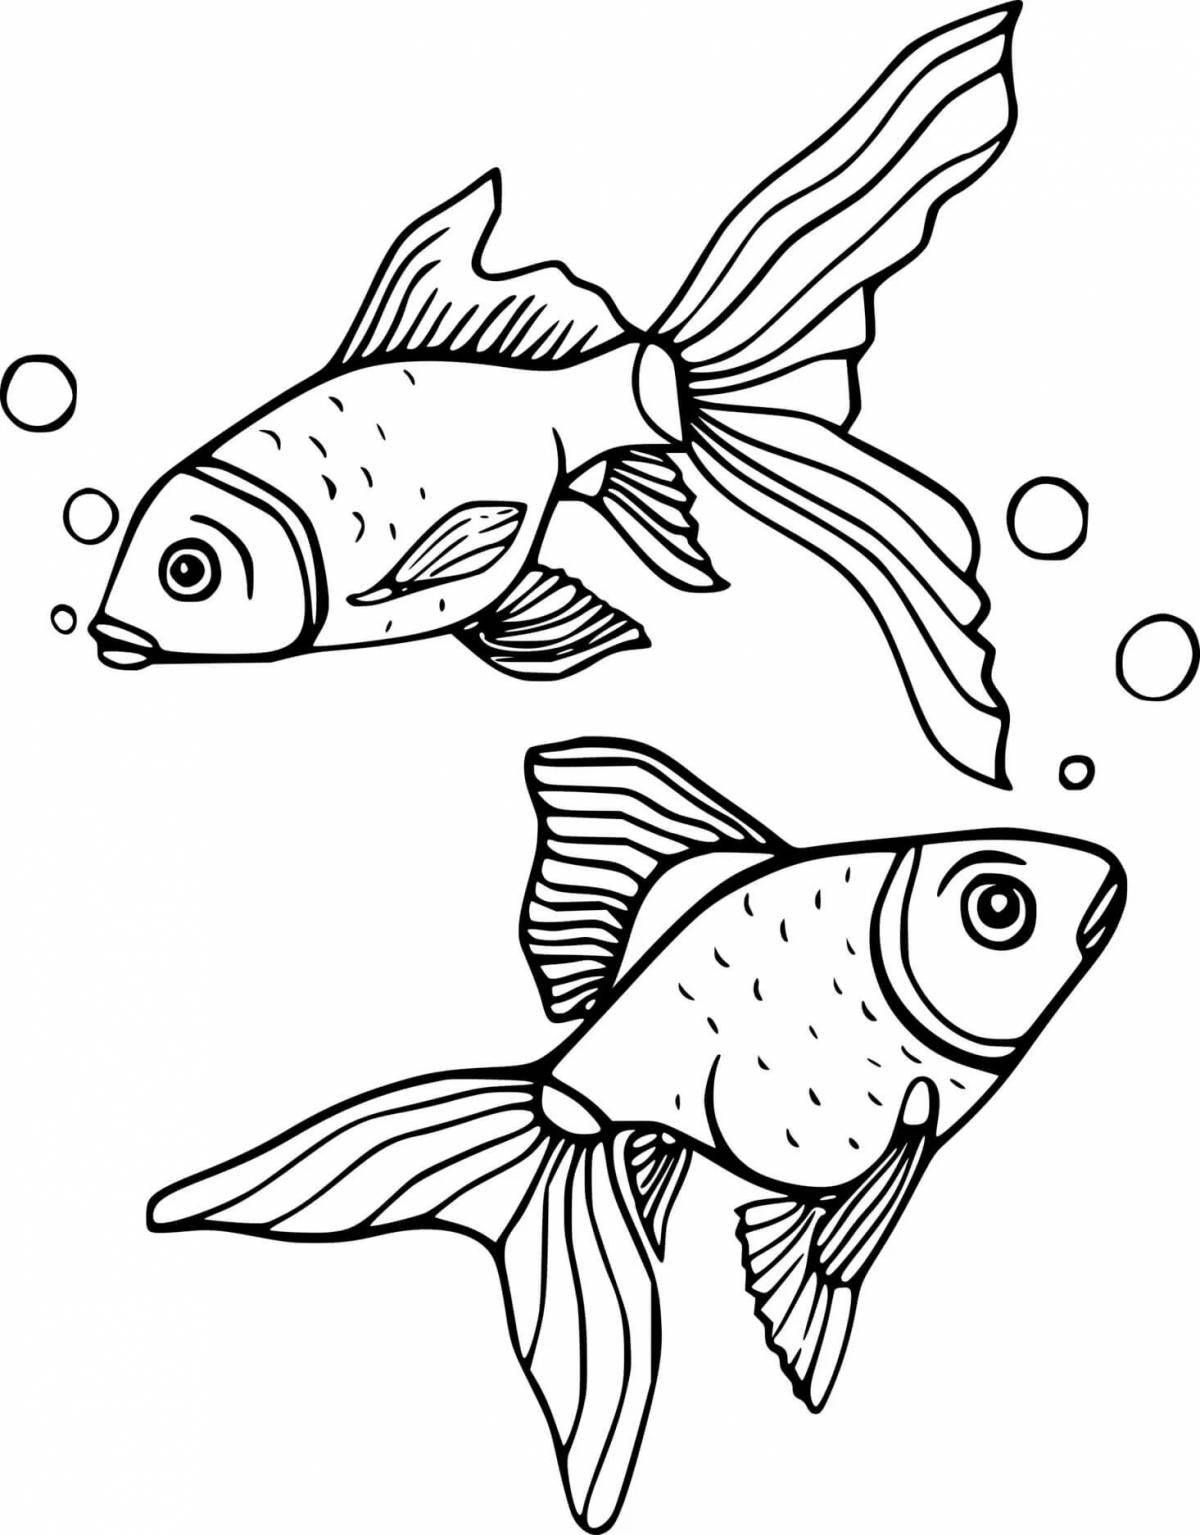 Funny aquarium fish coloring pages for kids